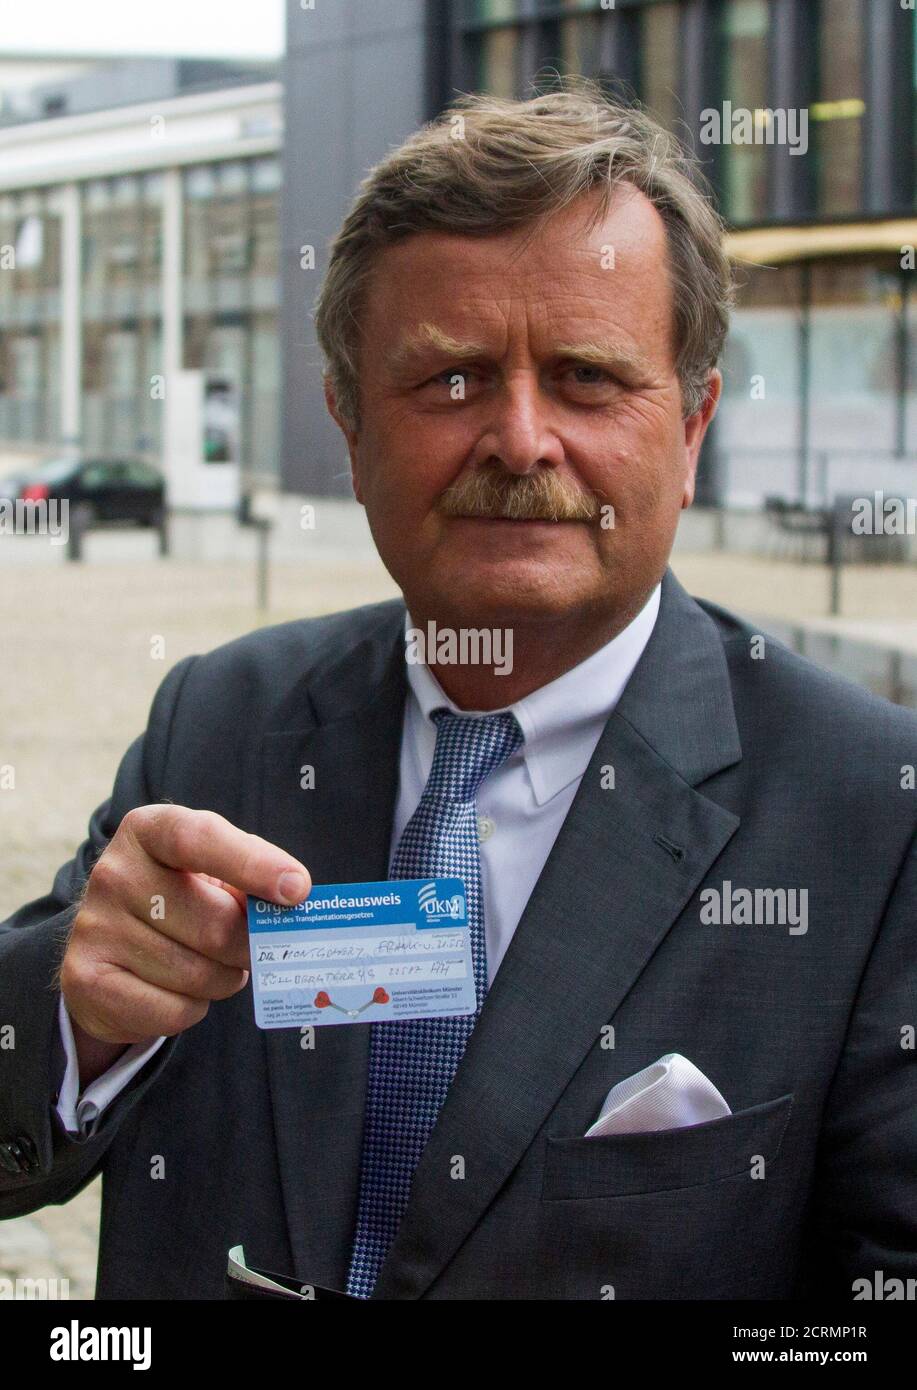 The head of the German Medical Association Frank Ulrich Montgomery (Bundesaerztekammer) shows his organ donation card to reporters before a crisis session to review the distribution praxis of donated organs in Berlin, August 9, 2012. The meeting was held on Thursday following a scandal in at least two hospitals where patients received preferred treatment against an additional fee.    REUTERS/Thomas Peter (GERMANY - Tags: HEALTH) Stock Photo